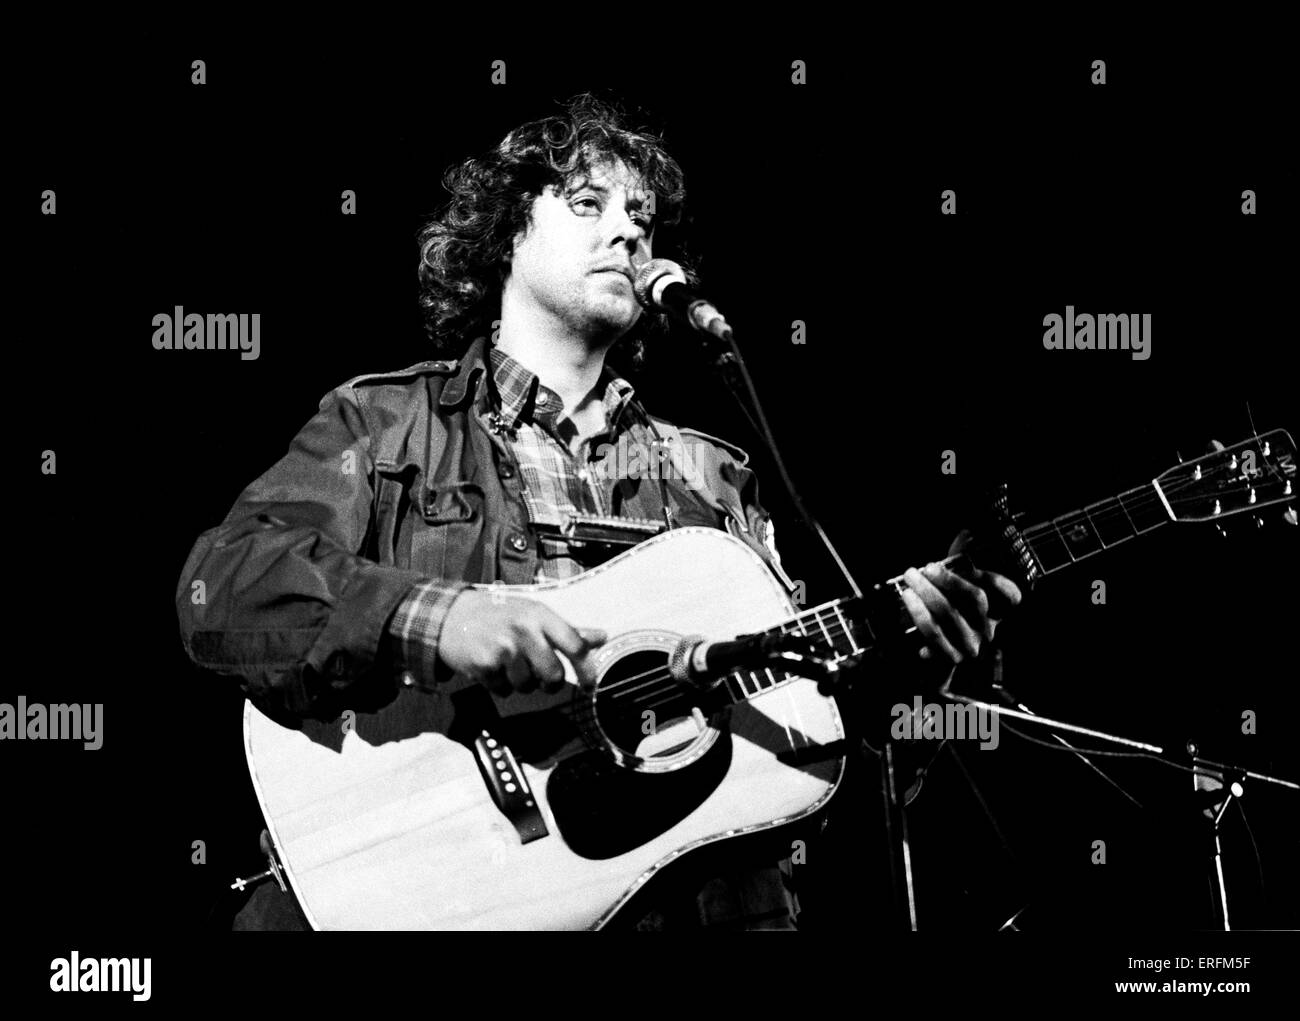 Arlo Guthrie - portrait of the American folk singer performing in London, 1981. b. 10 July 1947. Like his father, Woody Guthrie, Arlo often sings songs of protest against social injustice. Also composer & actor. Will be inducted into the Long Island Music Hall of Fame in 2007. Stock Photo